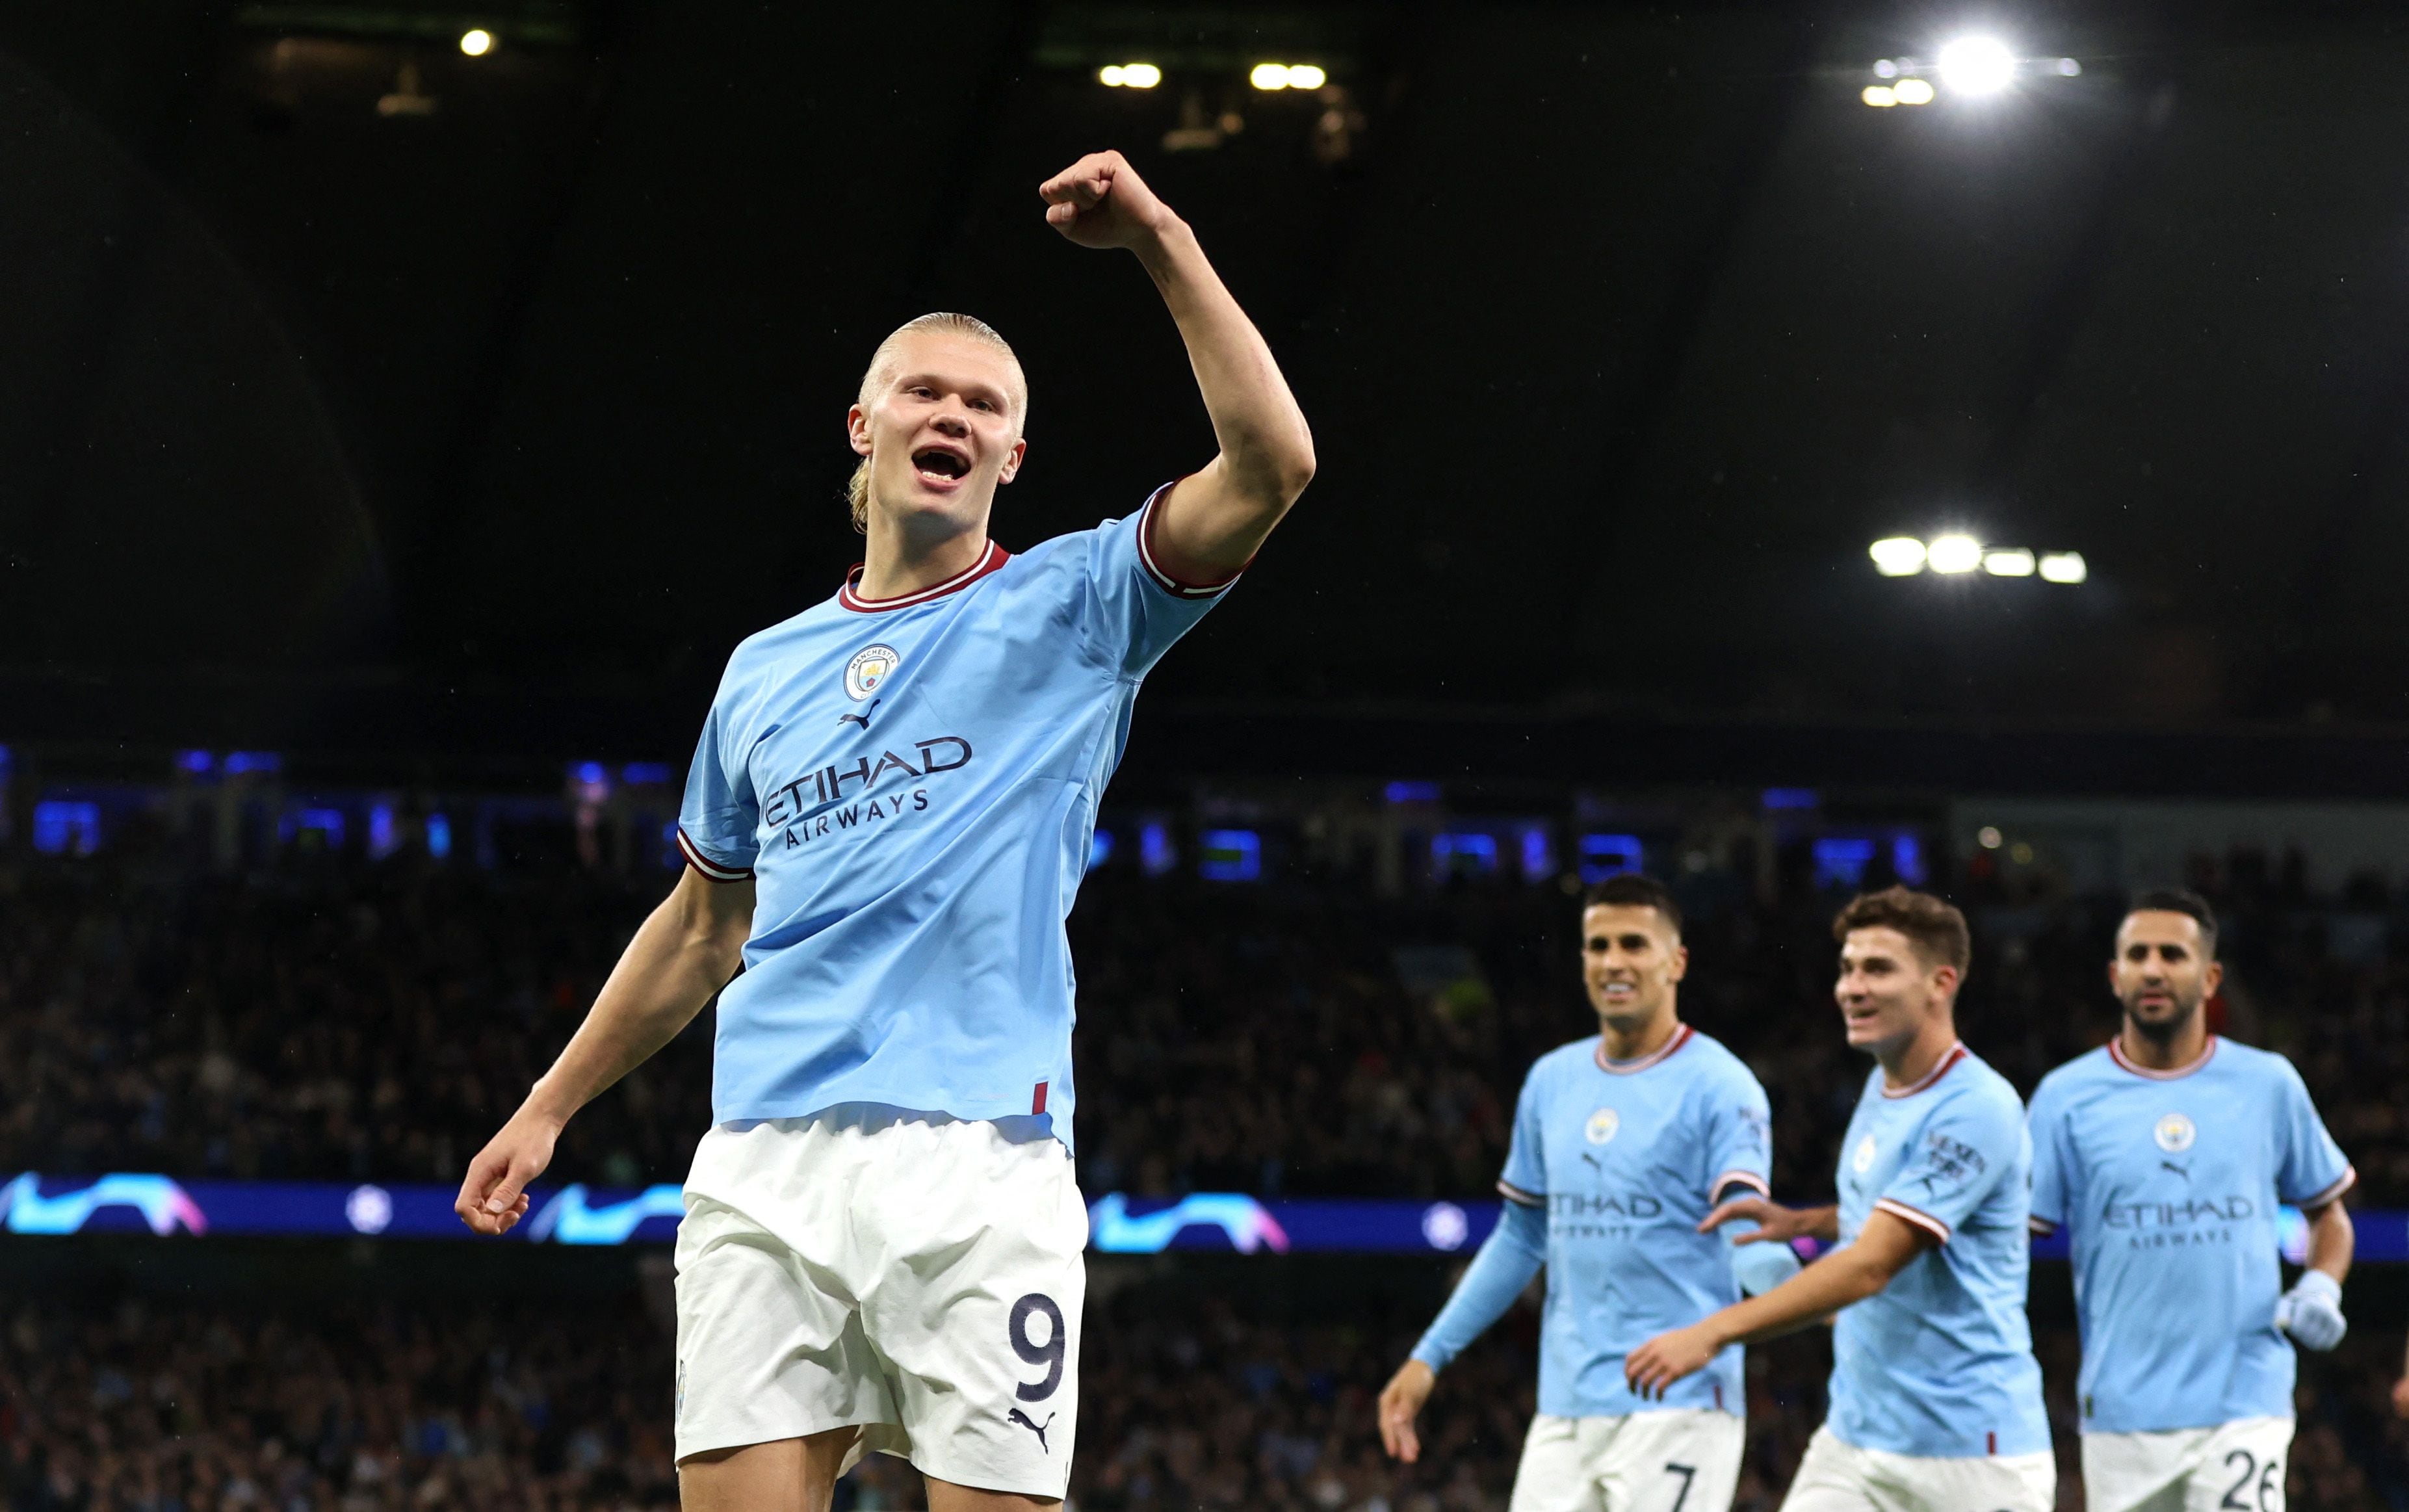 Soccer Football - Champions League - Group G - Manchester City v FC Copenhagen - Etihad Stadium, Manchester, Britain - October 5, 2022  Manchester City's Erling Braut Haaland celebrates scoring their first goal Action Images via Reuters/Lee Smith